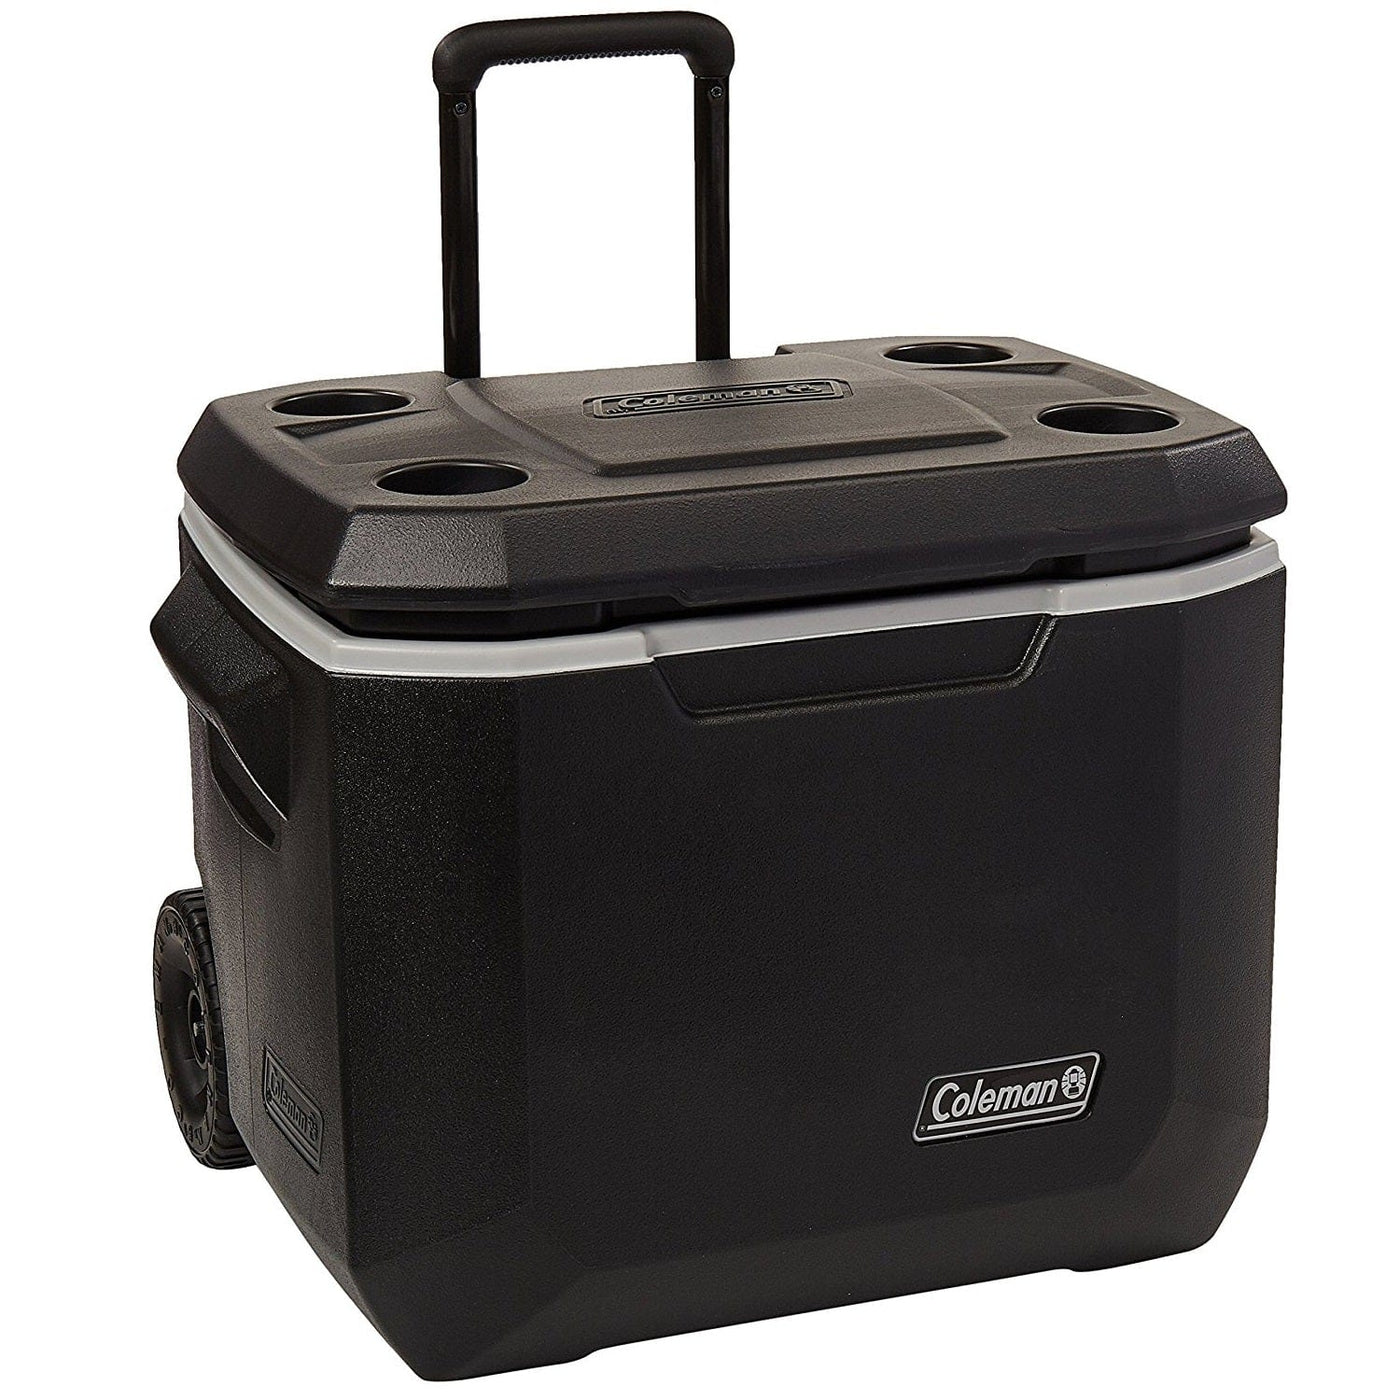 Coleman Coleman Xtreme Series Wheeled Cooler 50 Quart Camping And Outdoor